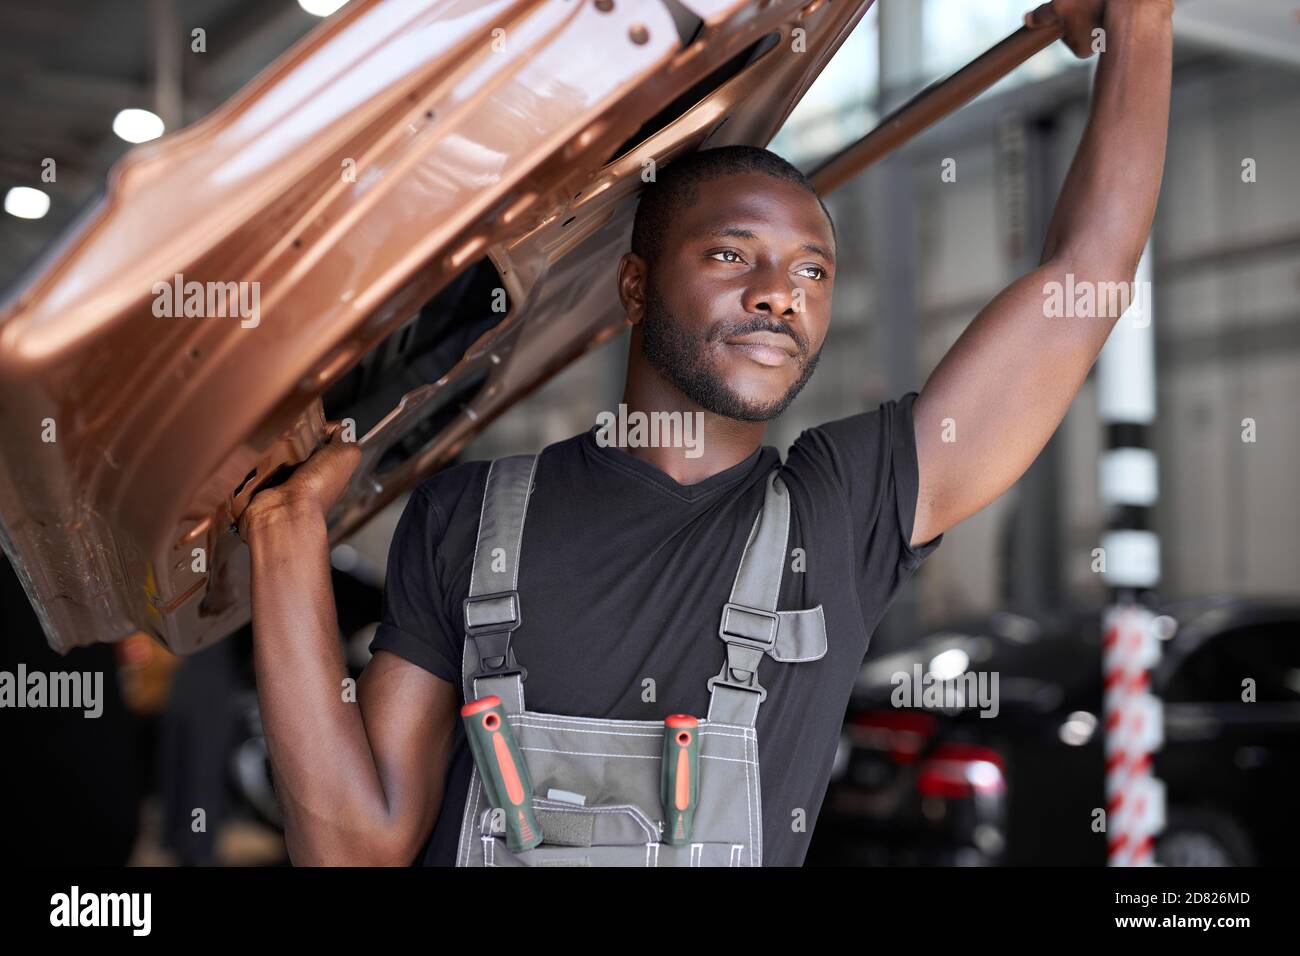 confident auto mechanic holding seperate part of the car, going to repair it at work place, hold it above head Stock Photo